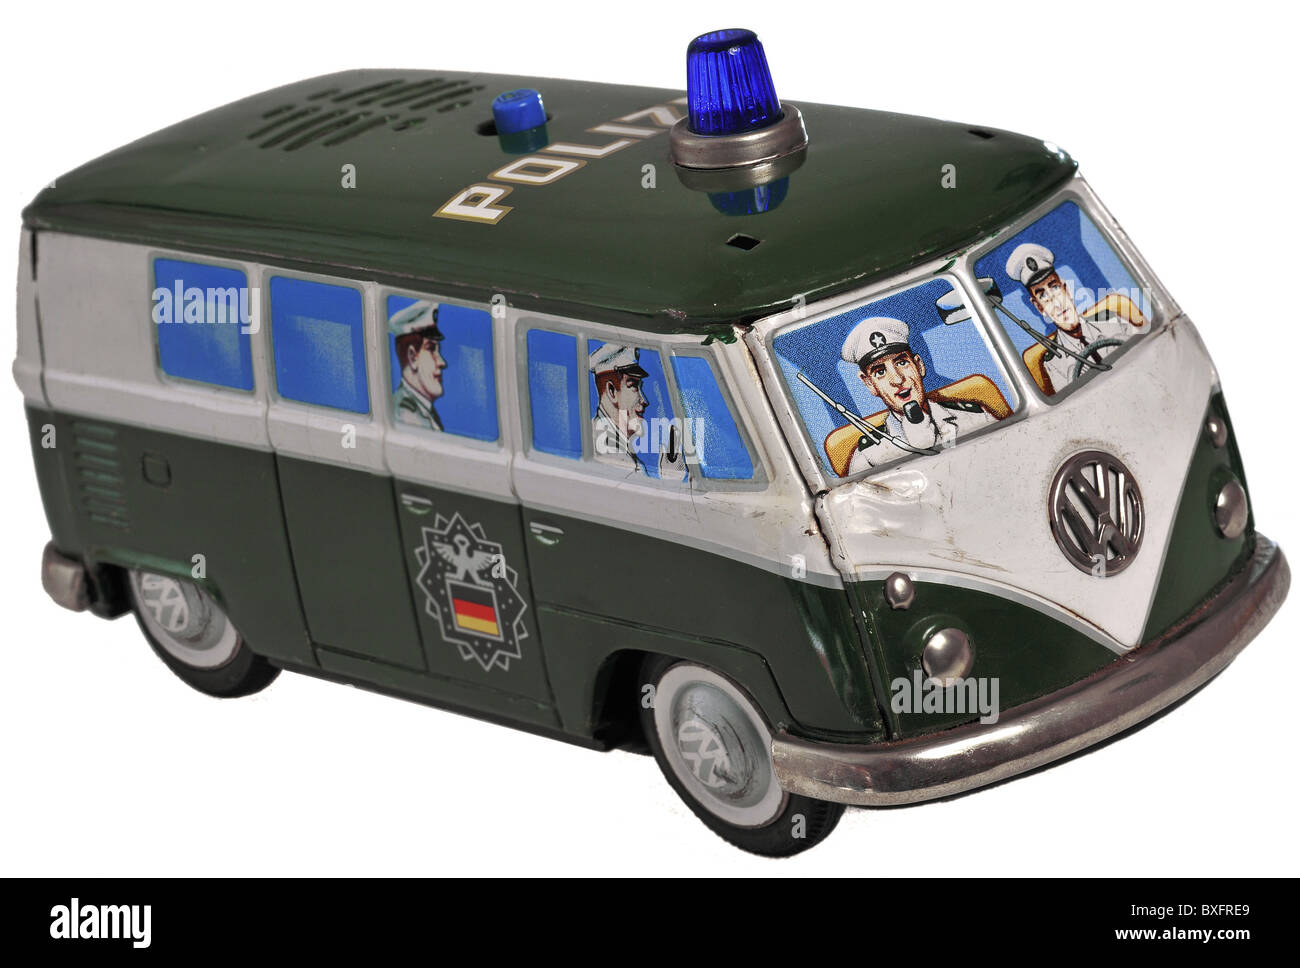 toys, German police car, Volkswagen Transporter T1, circa 1956, Japan, circa 1969, 1960s, 60s, 20th century, historic, historical, emergency vehicle, VW, police, police vehicle, Bulli, Bully, VW-Bully, VW-Bulli, tin toys, tin toy, Japanese, clipping, cut out, cut-out, cut-outs, 1950s, 1970s, Additional-Rights-Clearences-Not Available Stock Photo